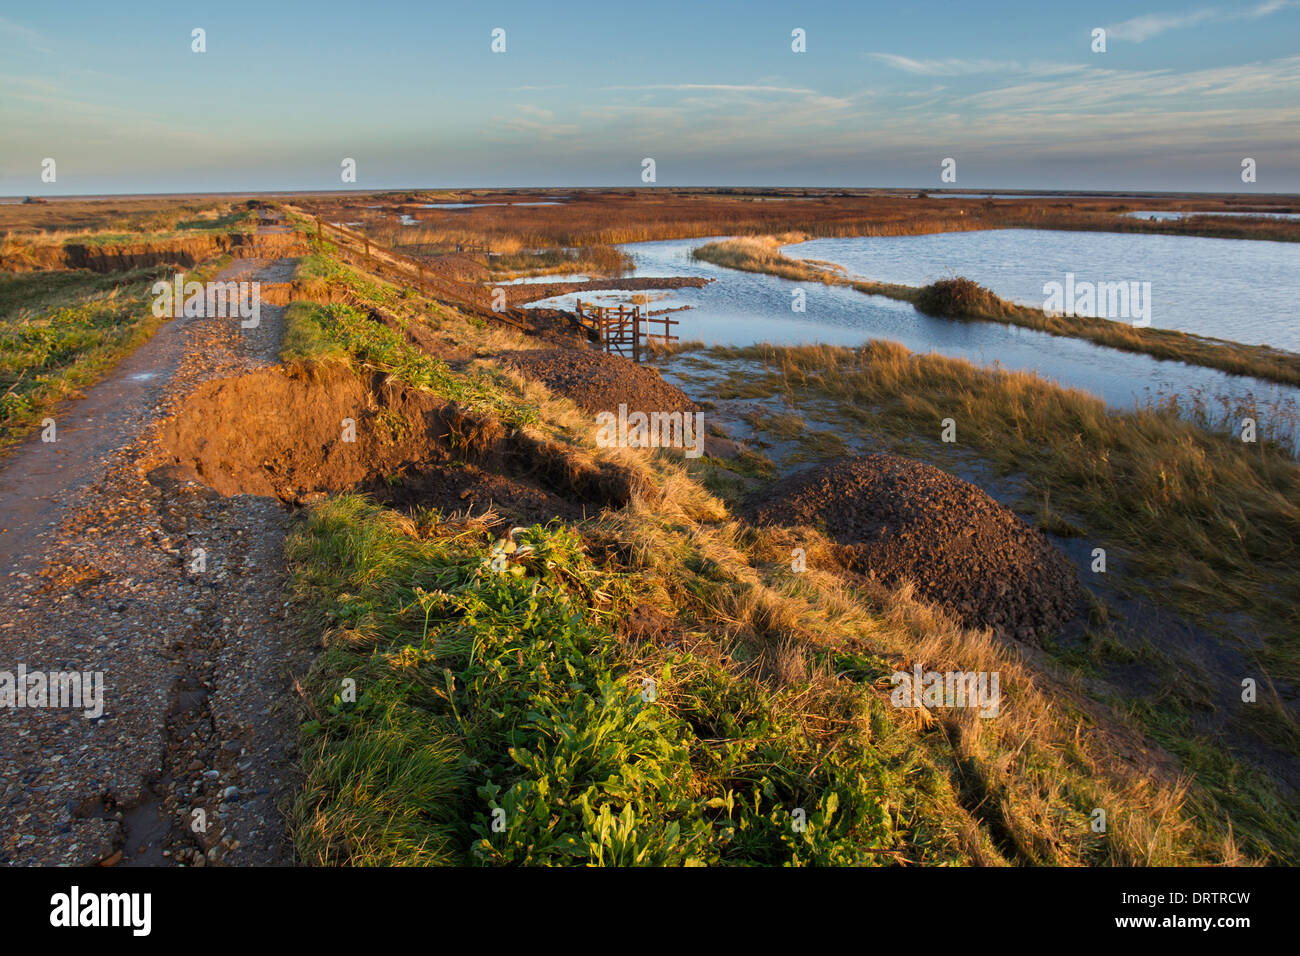 Sea defence damage at Blakeney in North Norfolk, East Anglia, UK, following the storm surge in December 2013 Stock Photo